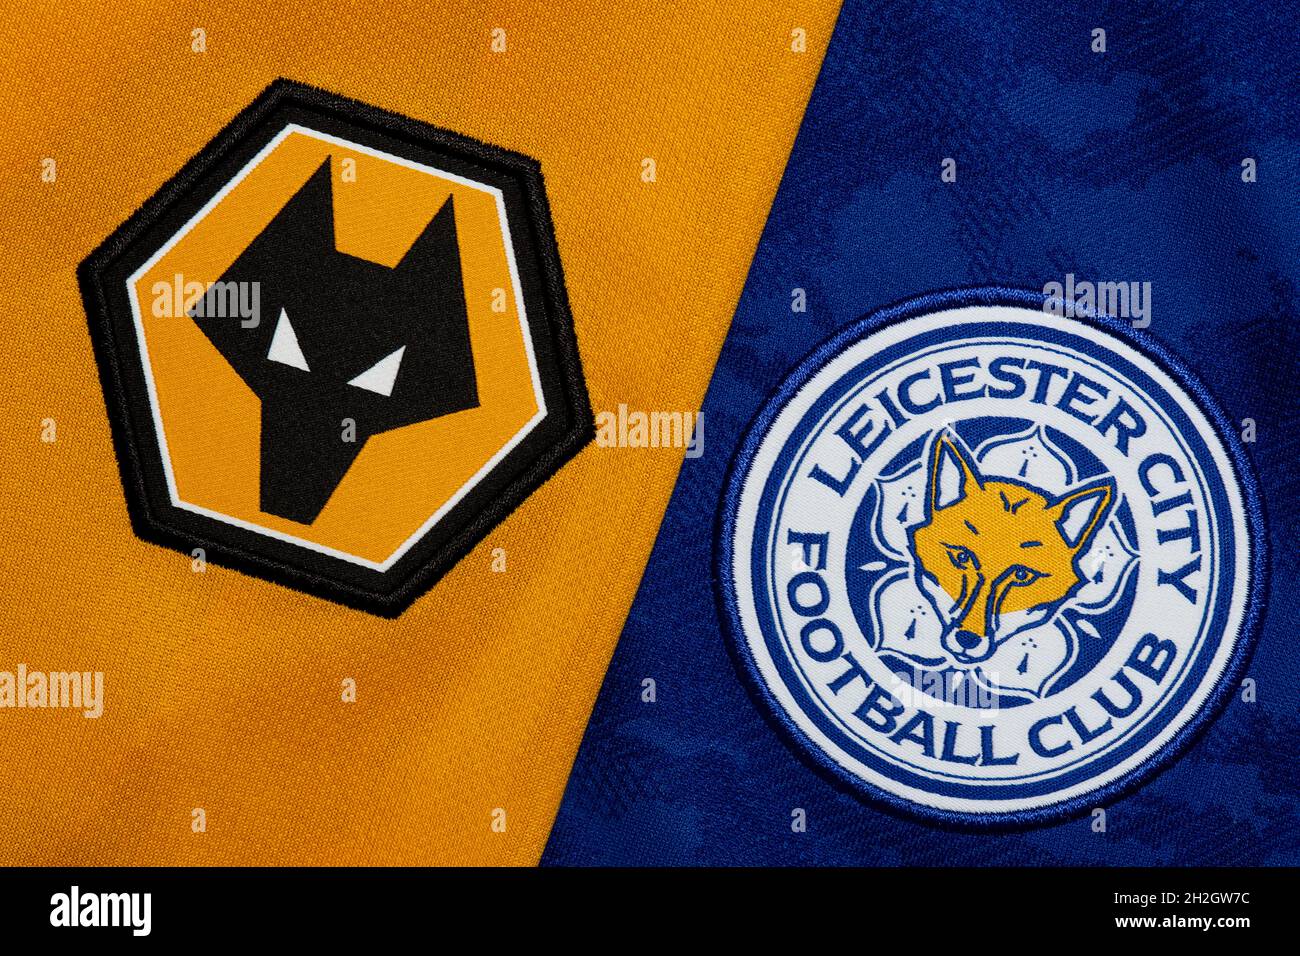 Close up of Wolverhampton Wanderers and Leicester City club crest. Stock Photo